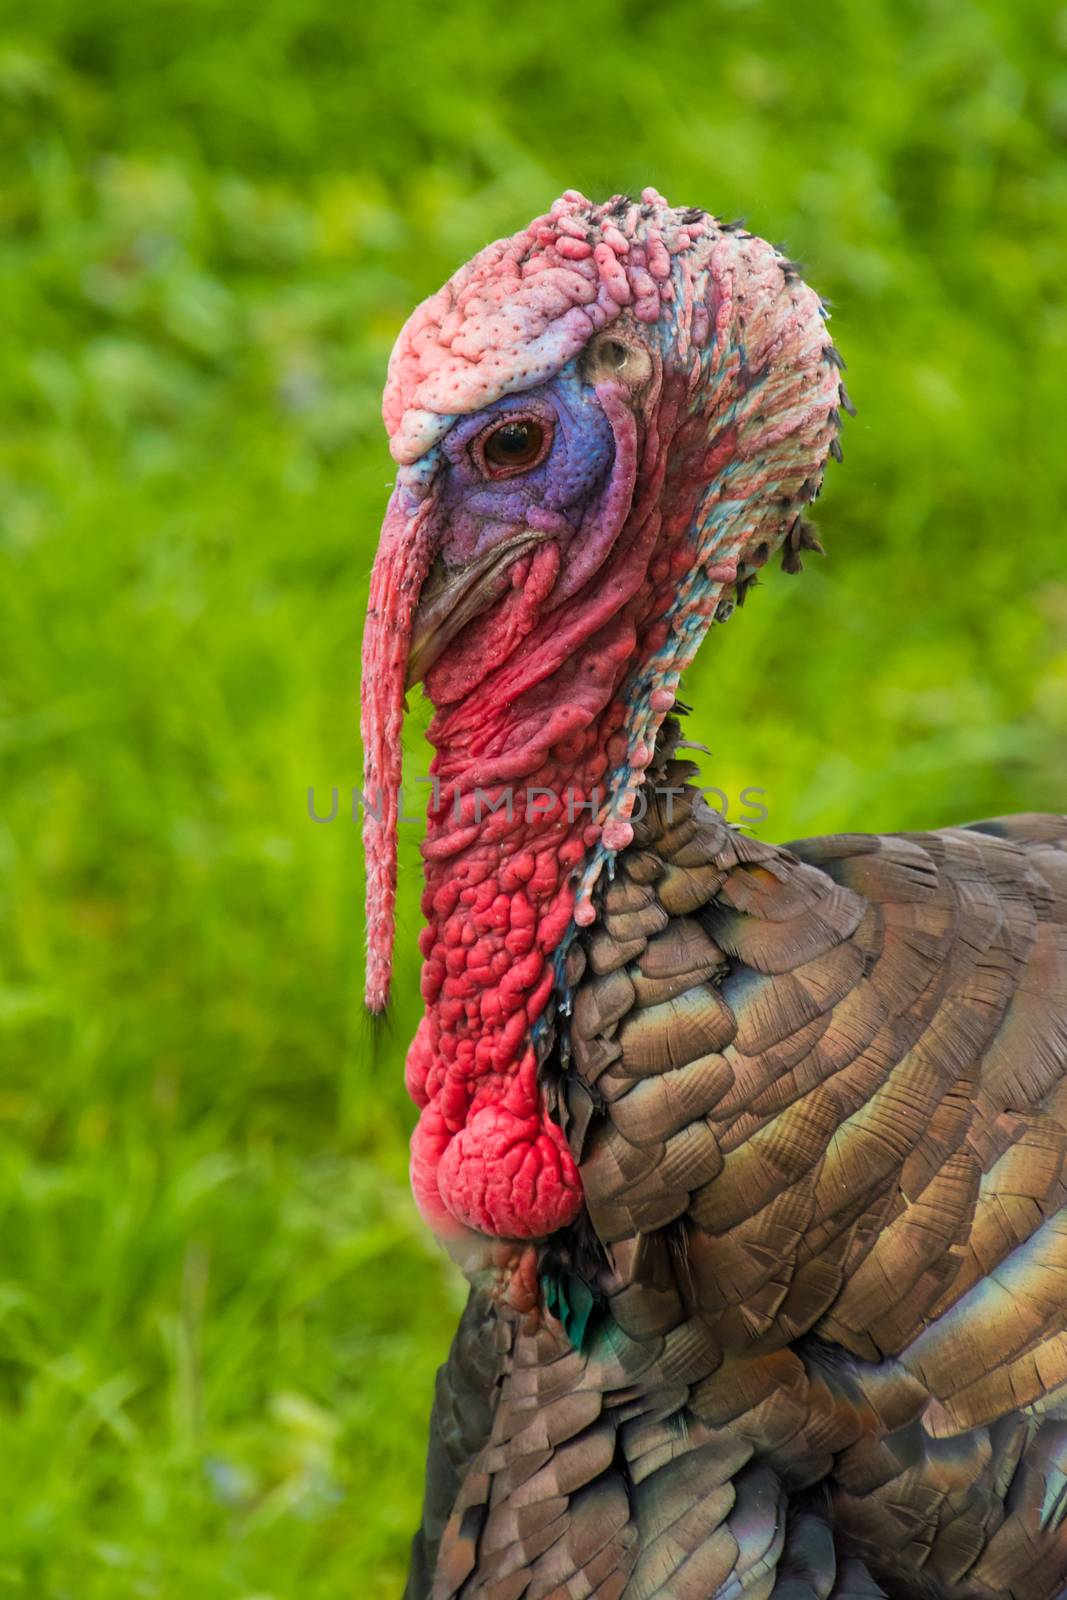 Bronze turkey gobbler colorful feathers and skin by MXW_Stock